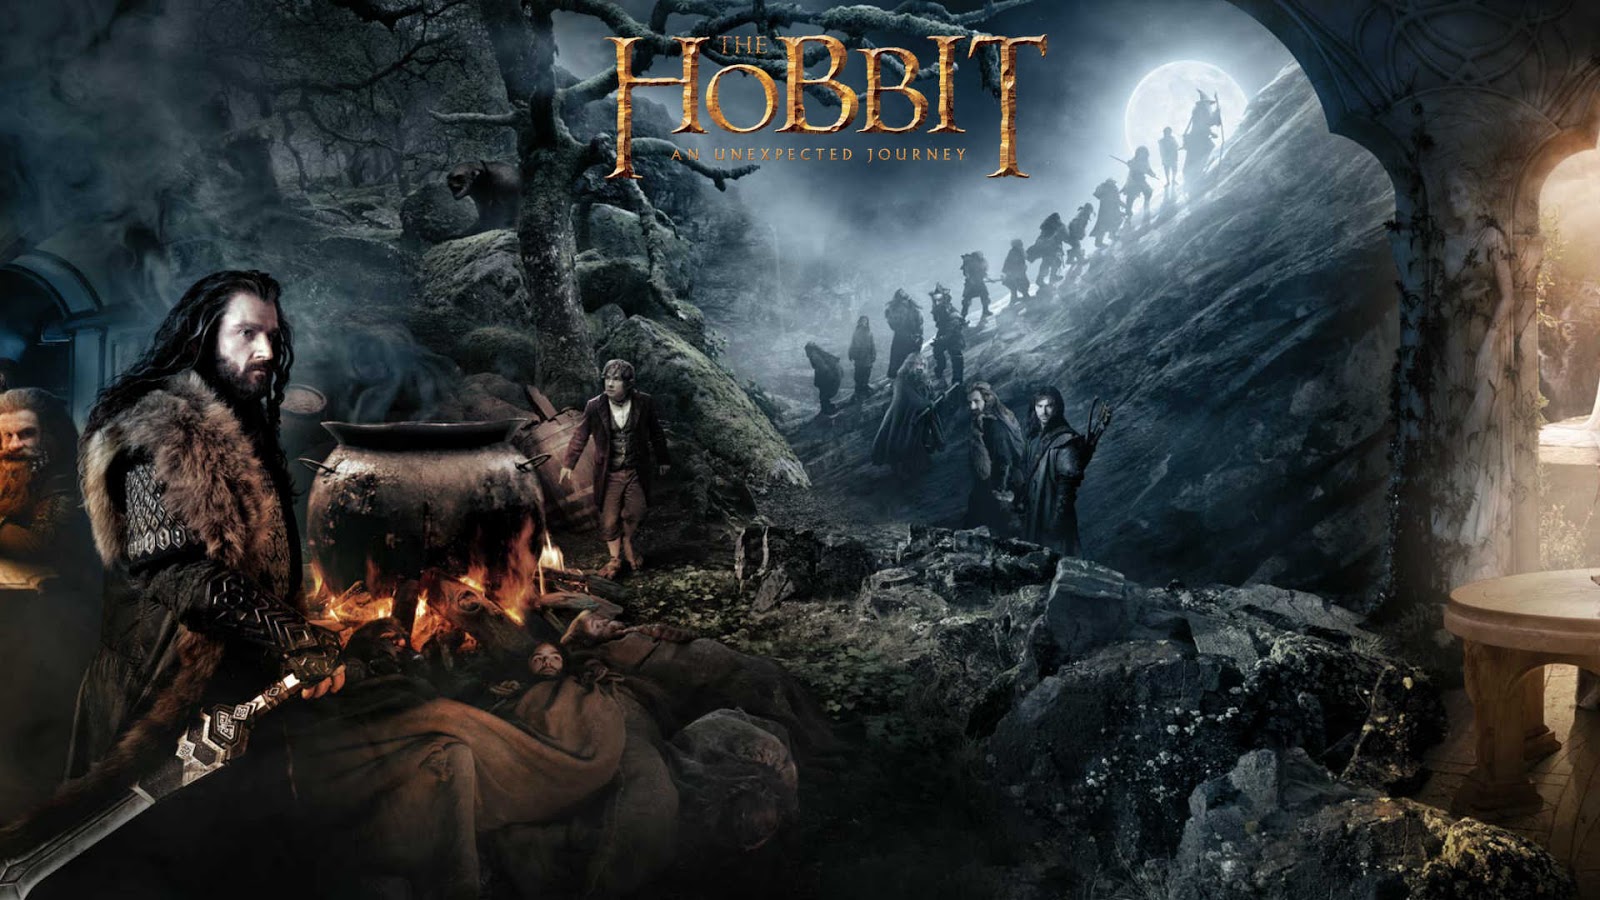 Free The Hobbit: An Unexpected Journey HD iPad wallpaper 07